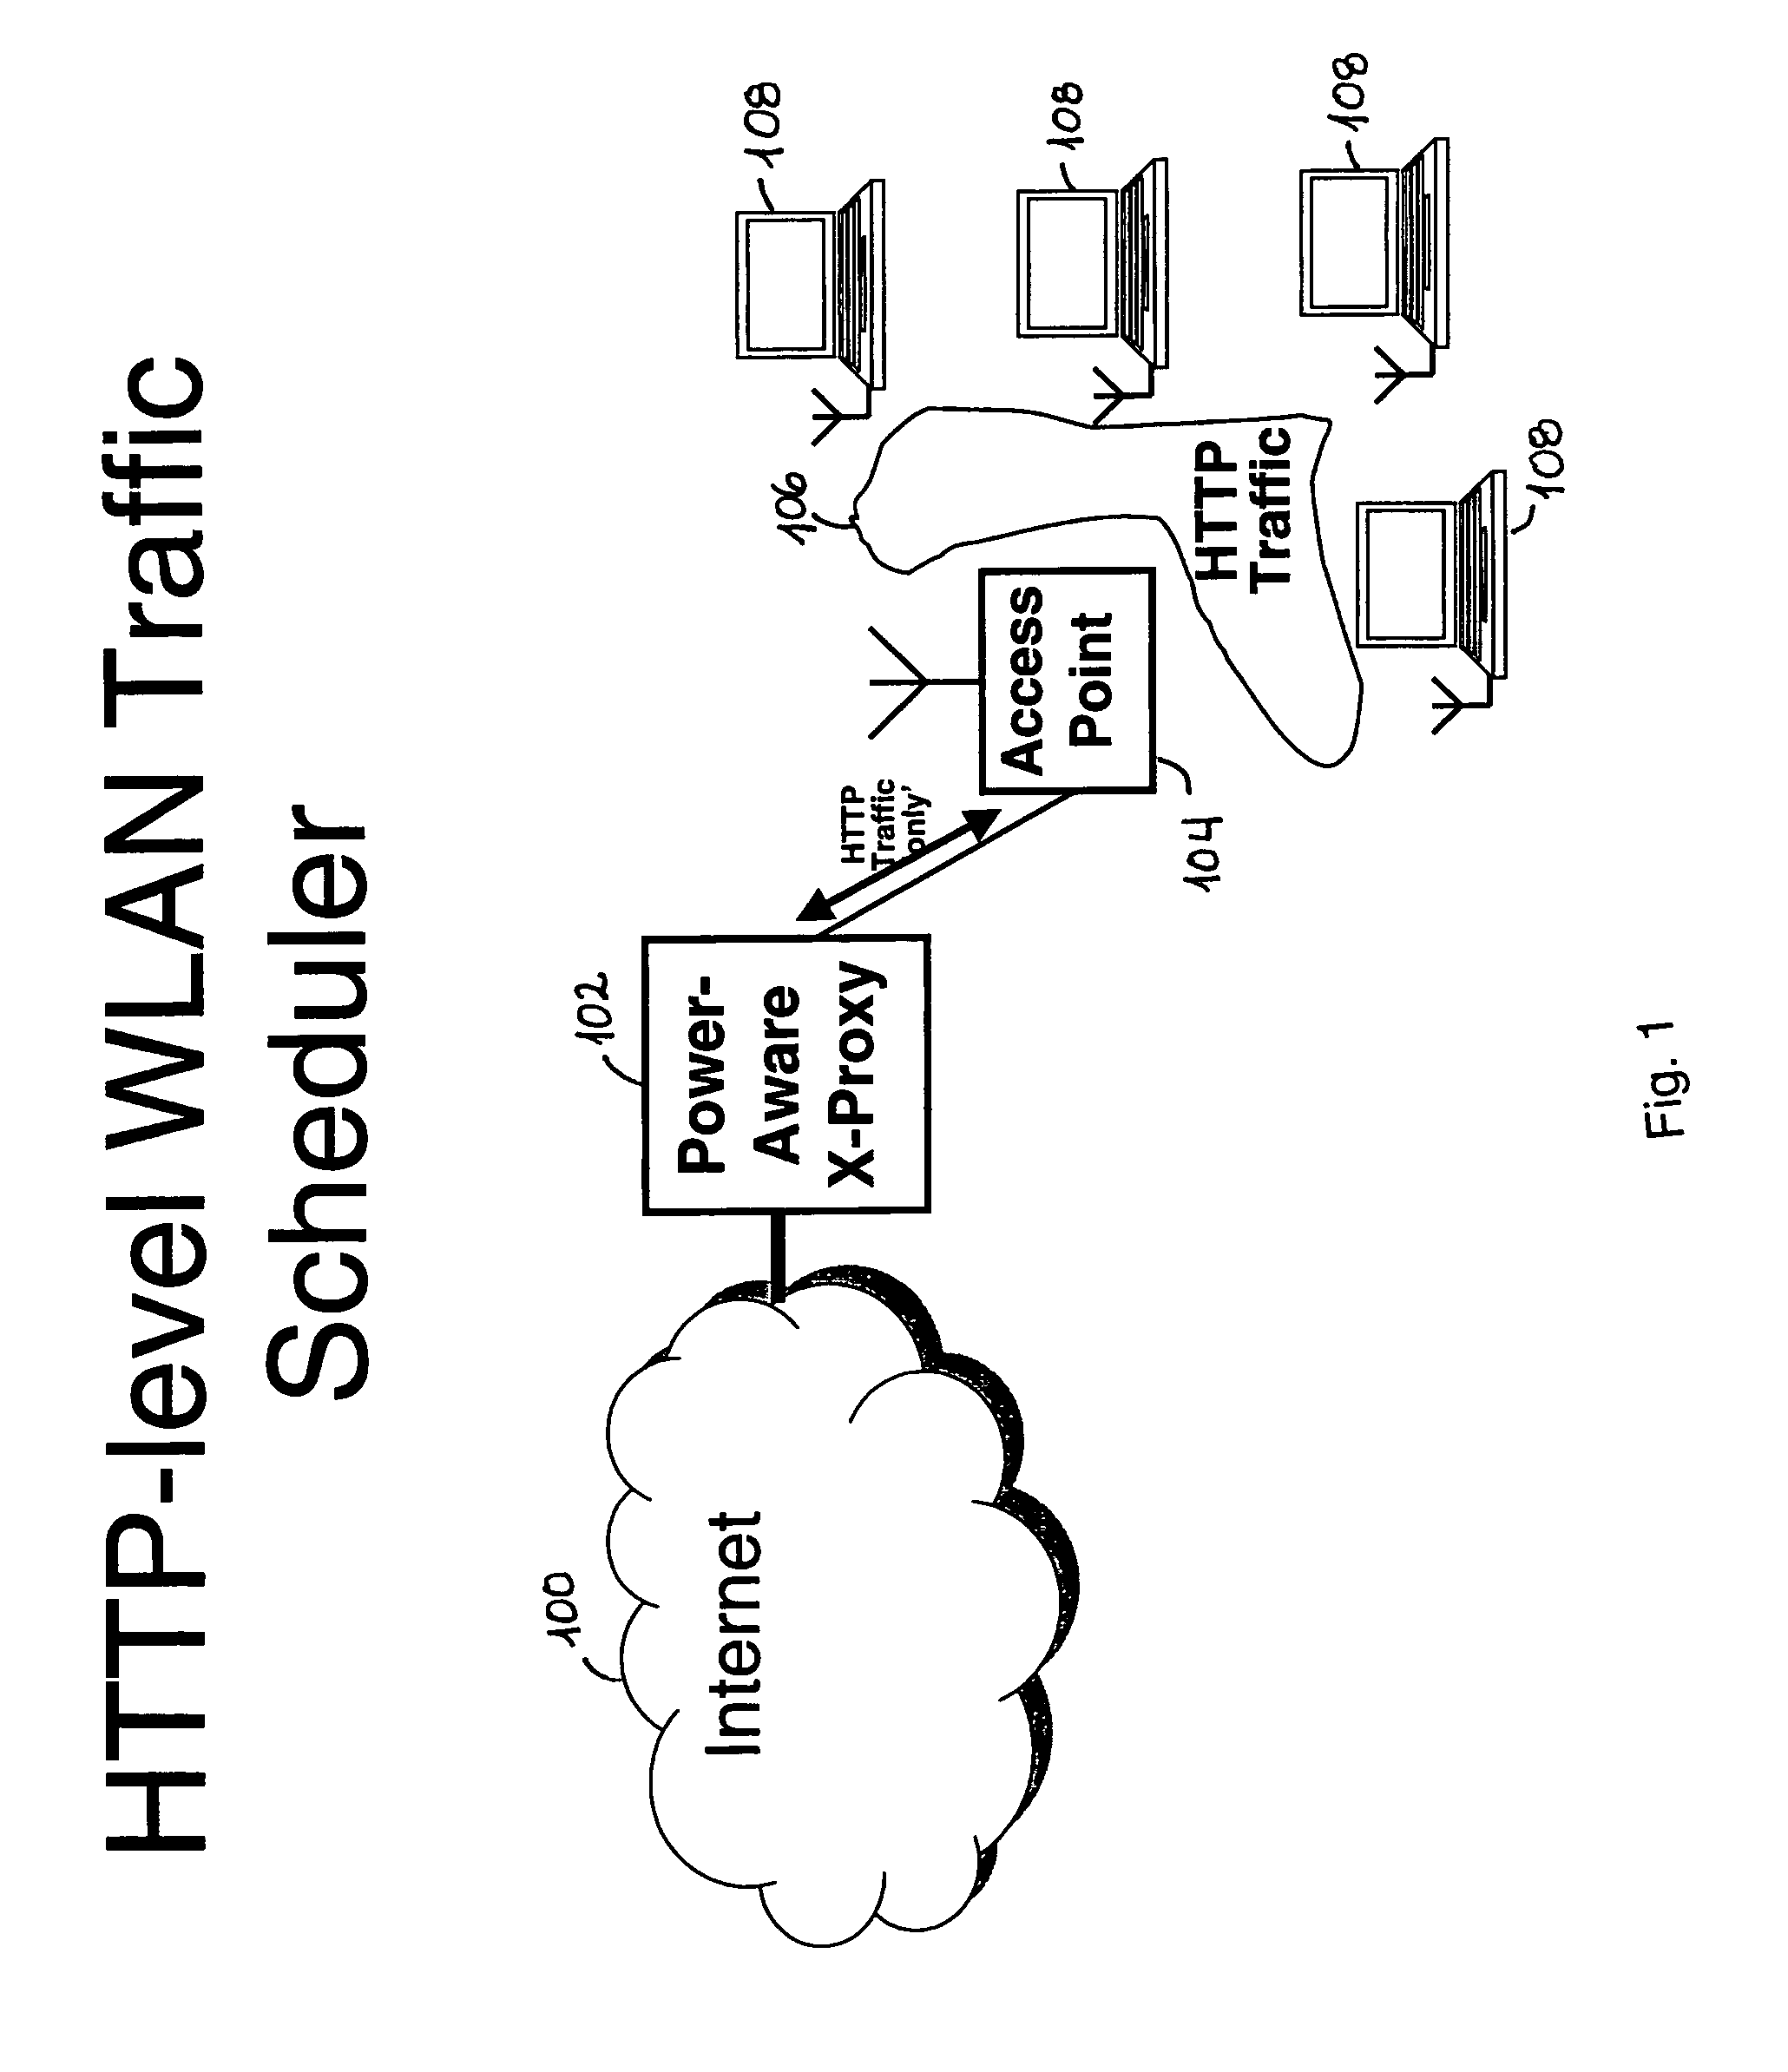 Method and apparatus for scheduling wireless LAN traffic